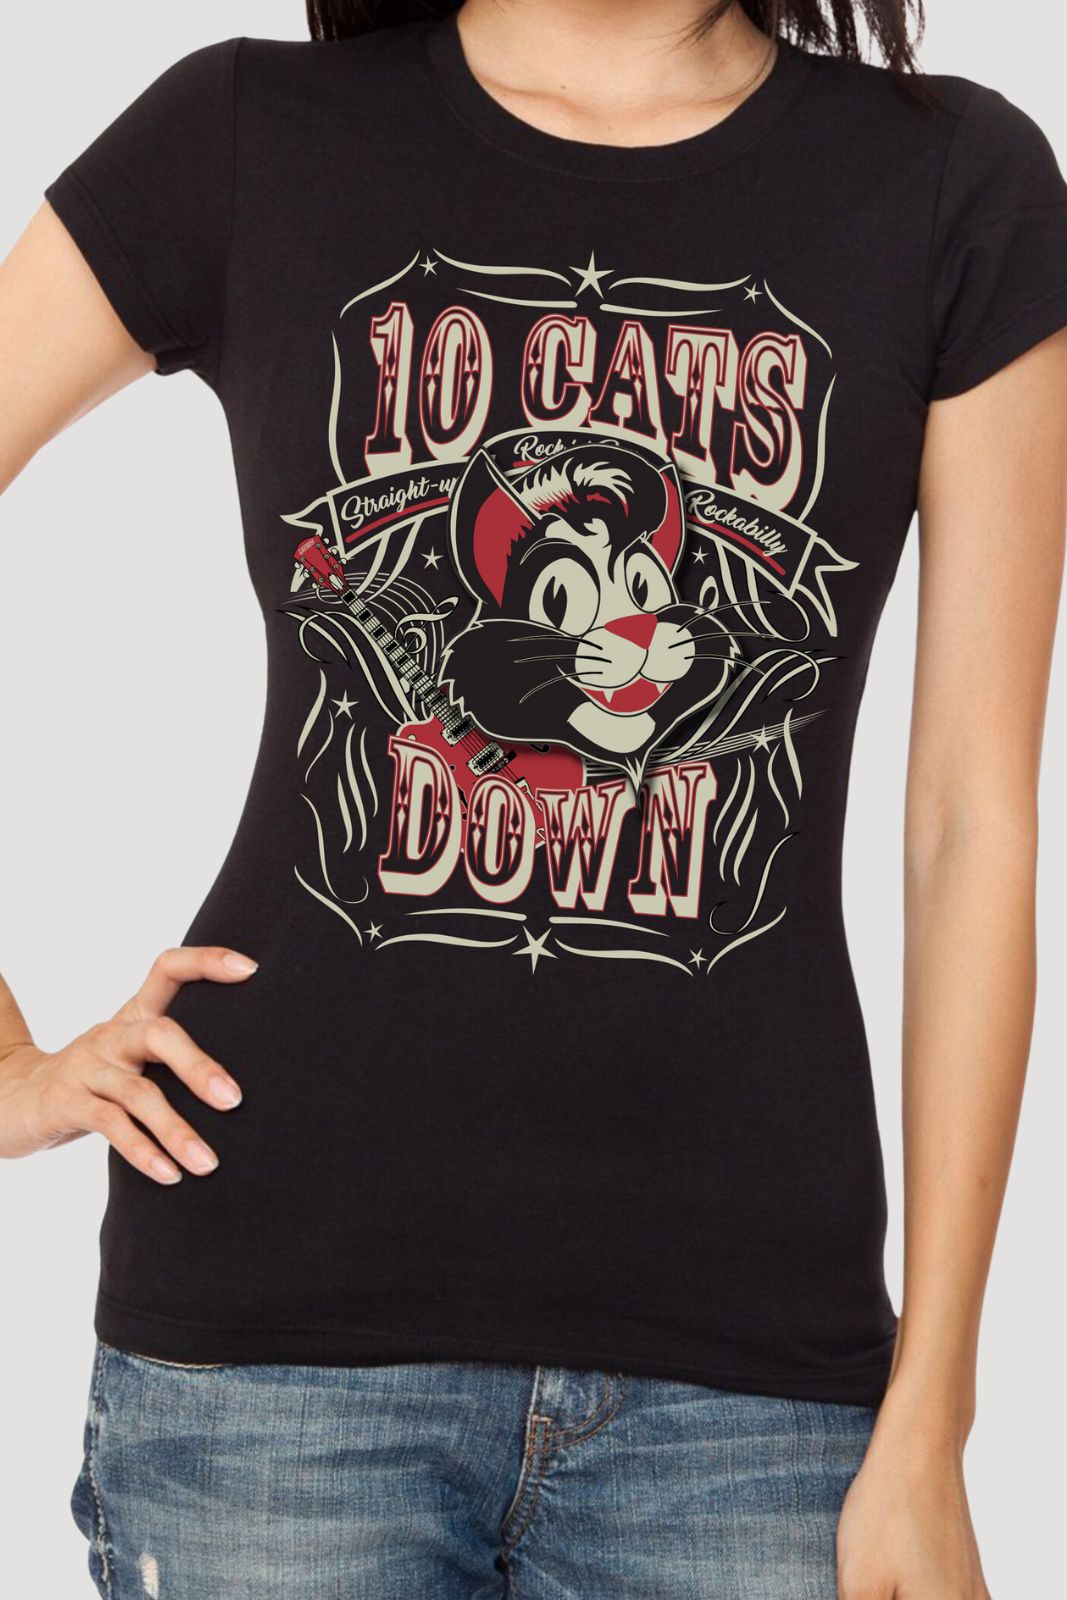 10 Cats Down Shirt Red